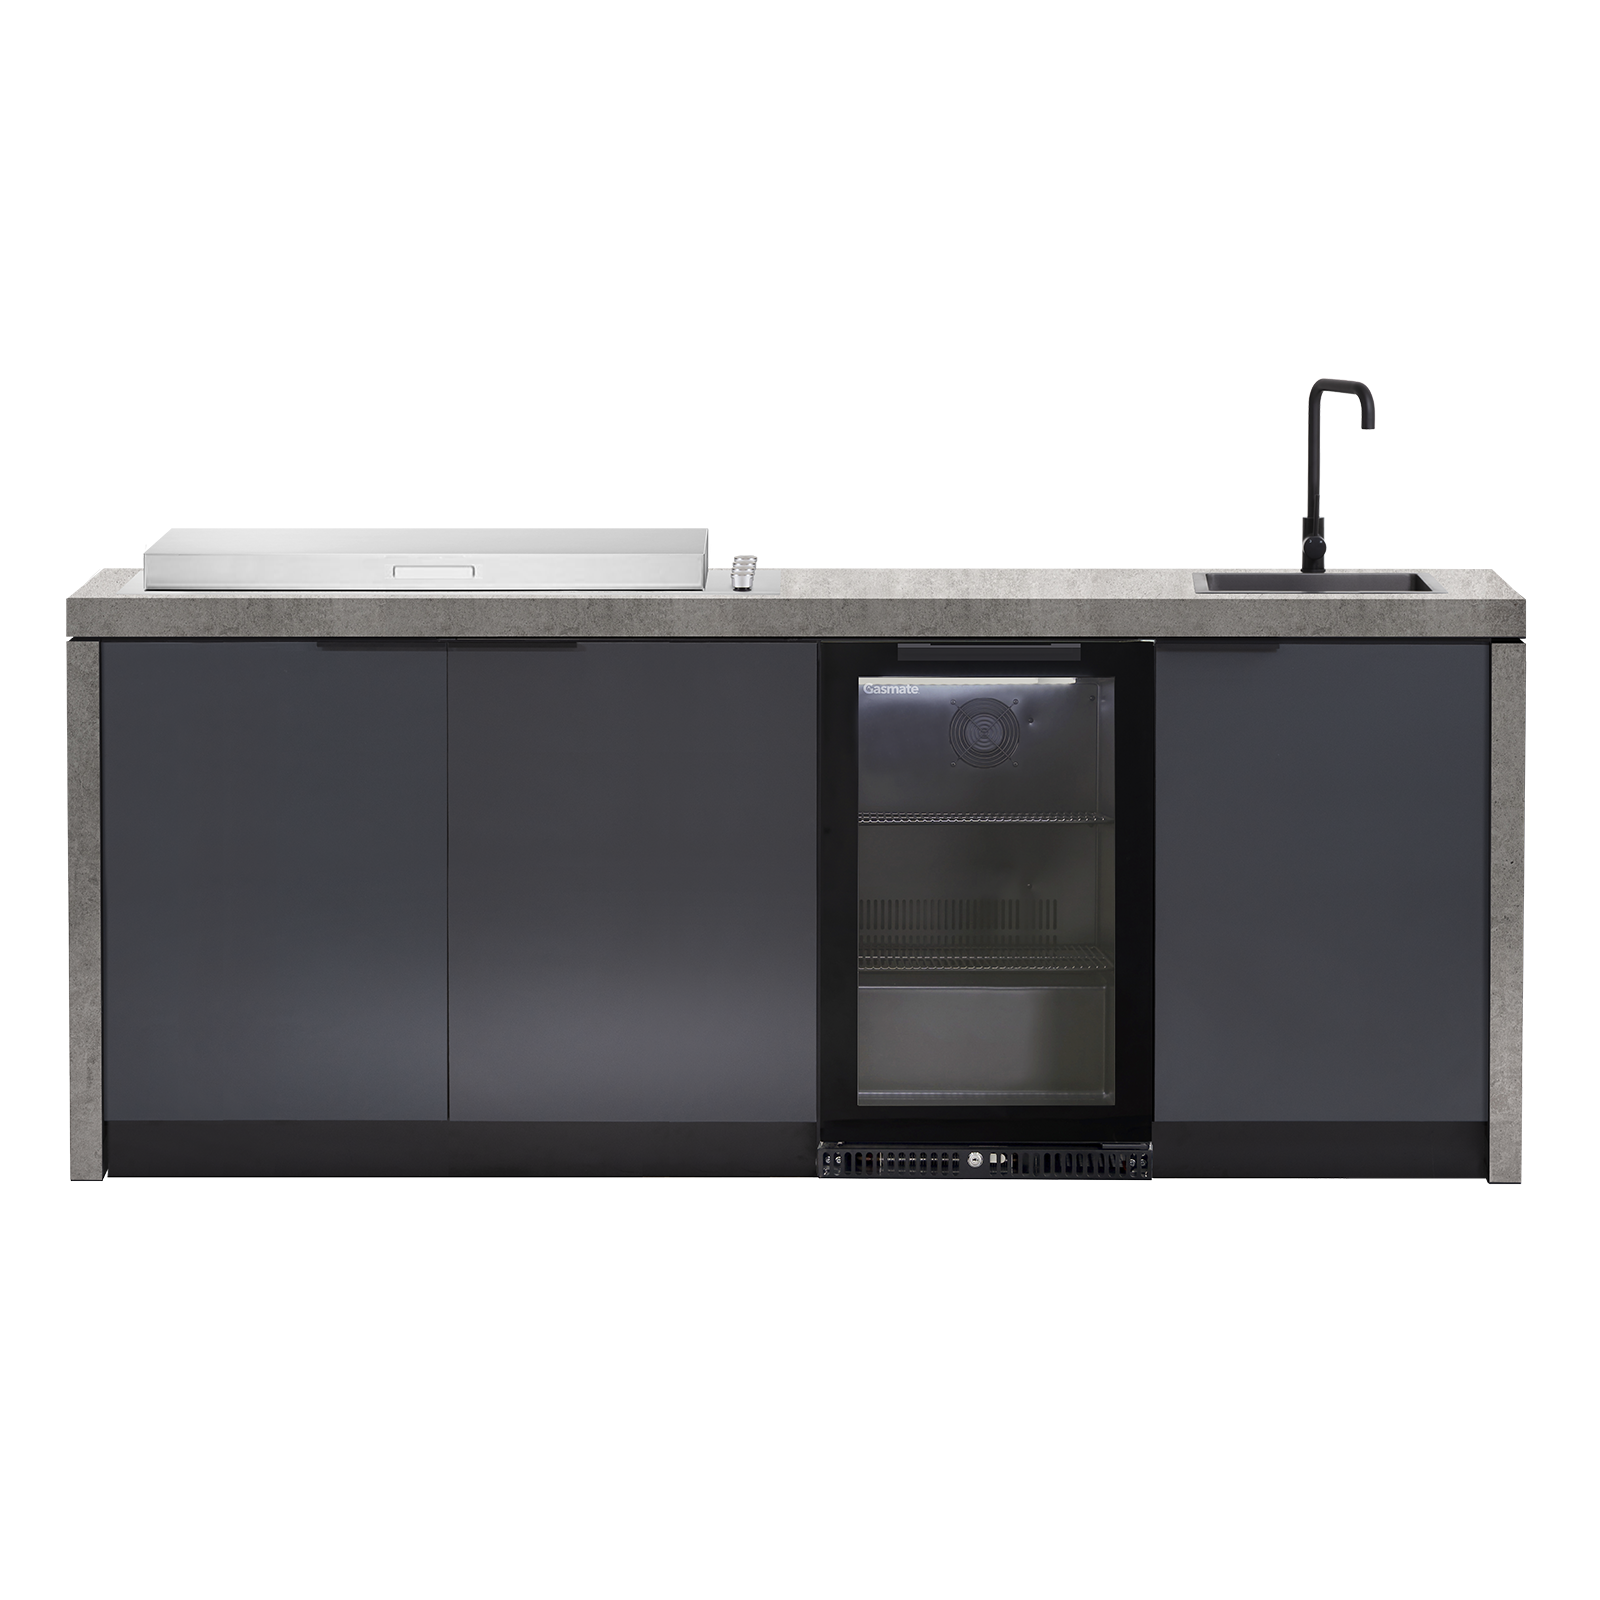 Cabinex Minimal Outdoor Kitchen with BeefEater Signature Proline BBQ